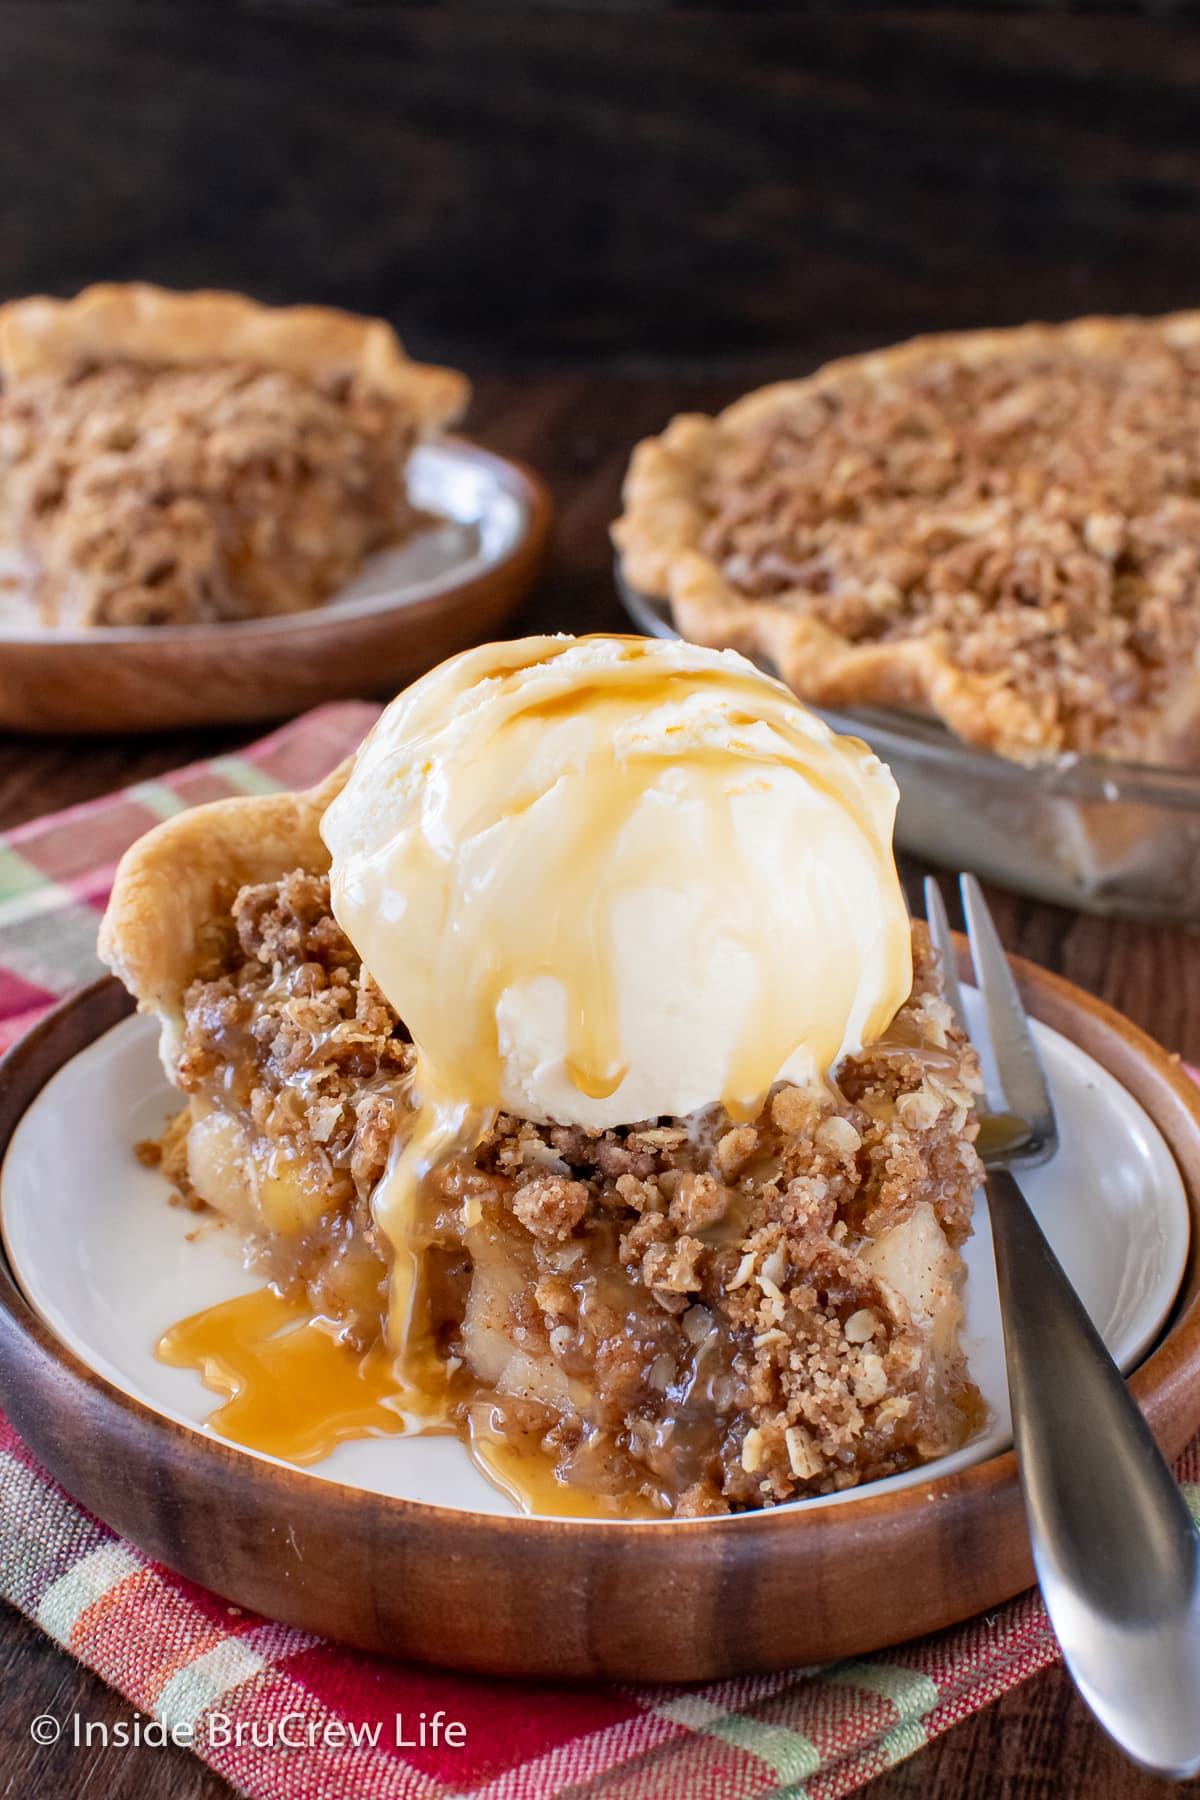 A slice of apple crumble pie topped with ice cream and caramel topping.